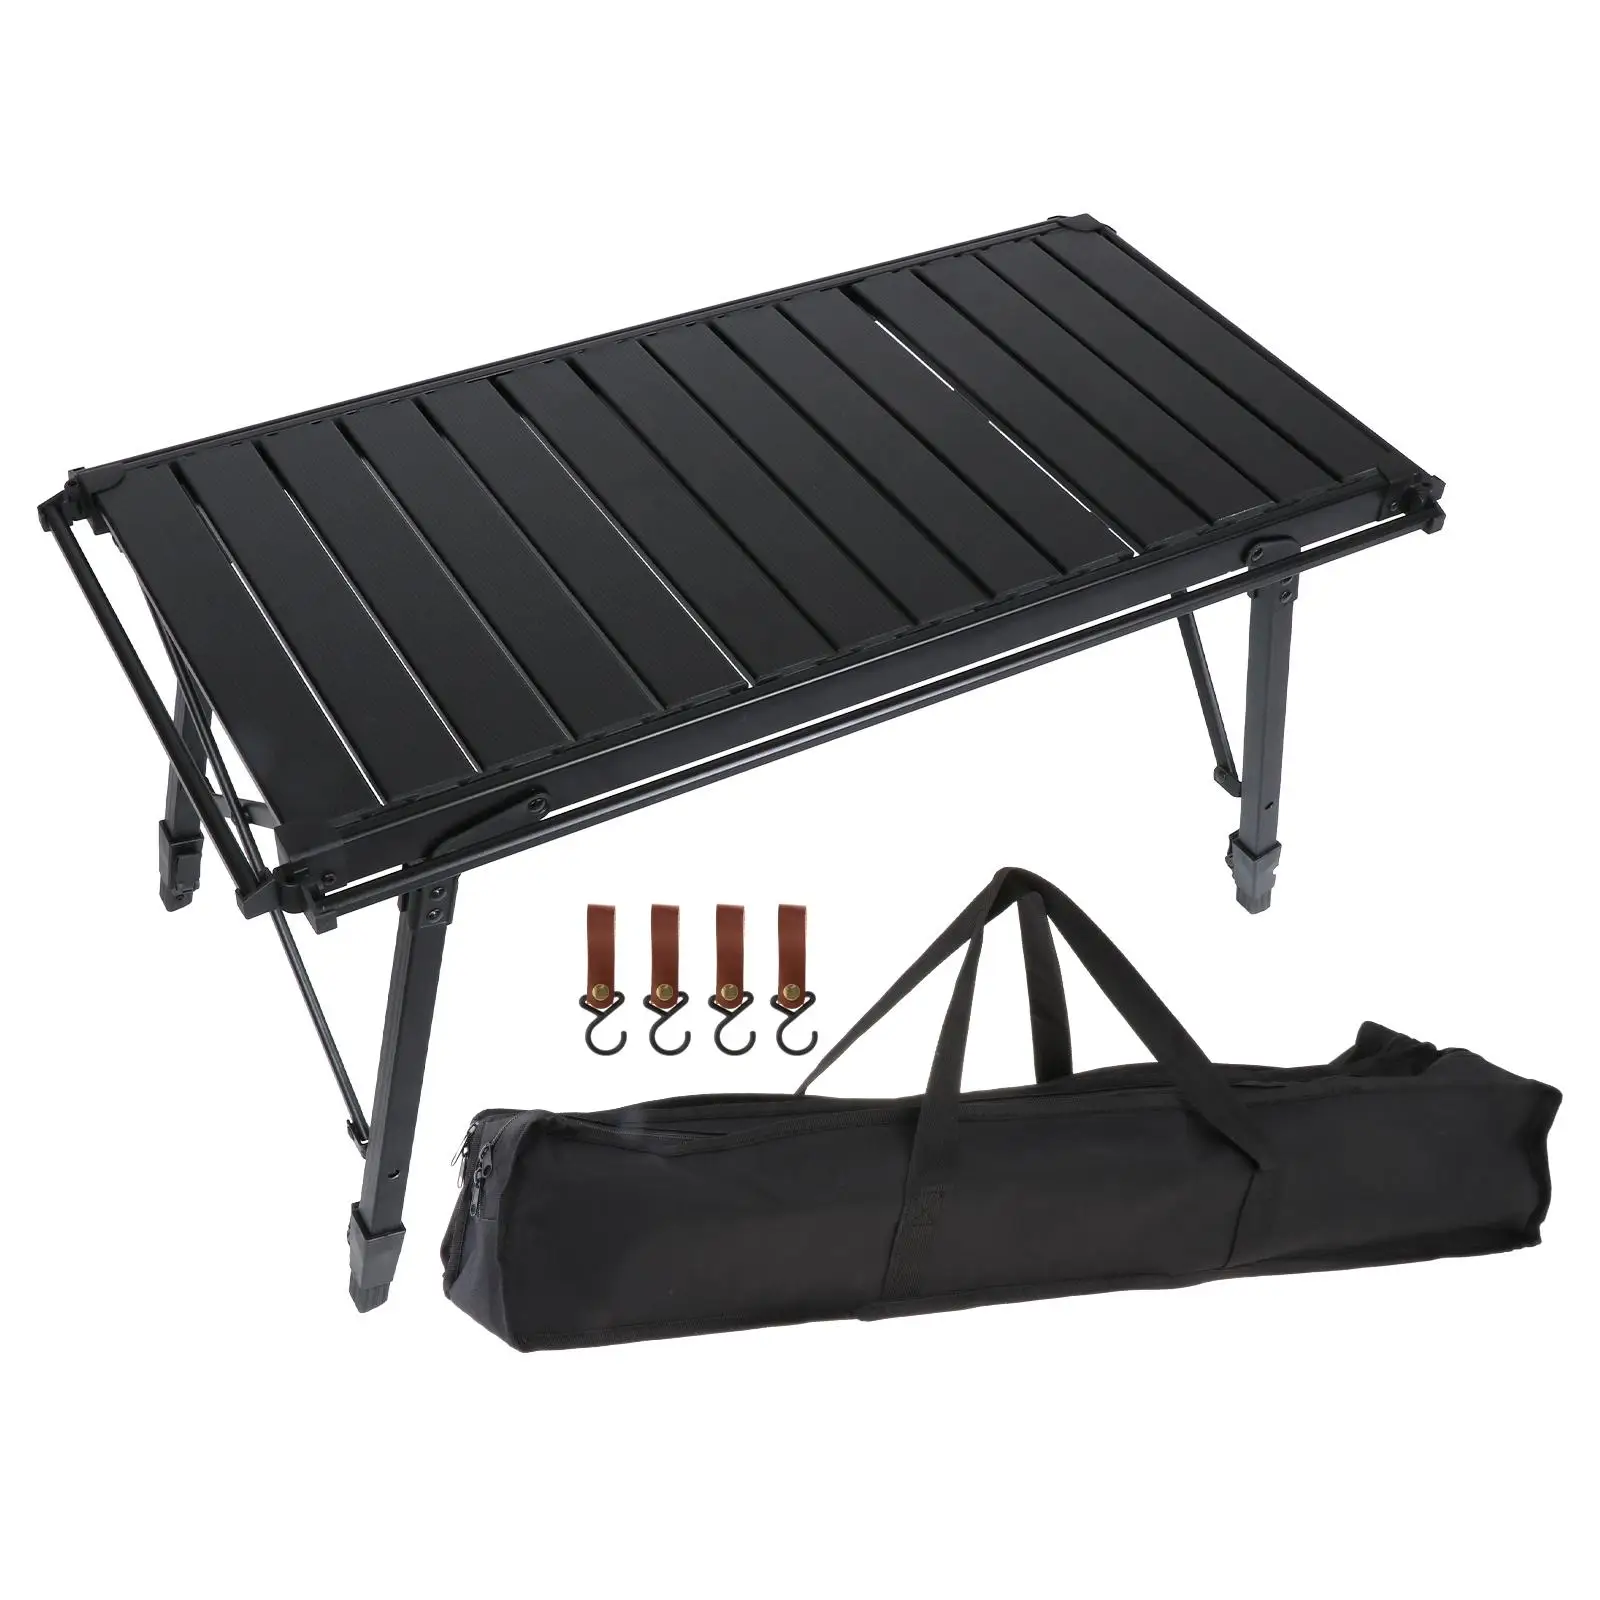 Camping Folding Table Easy to Carry with Storage Carrying Bags Outdoor Table for Picnic Backyard Hiking Outdoor Indoor Deck